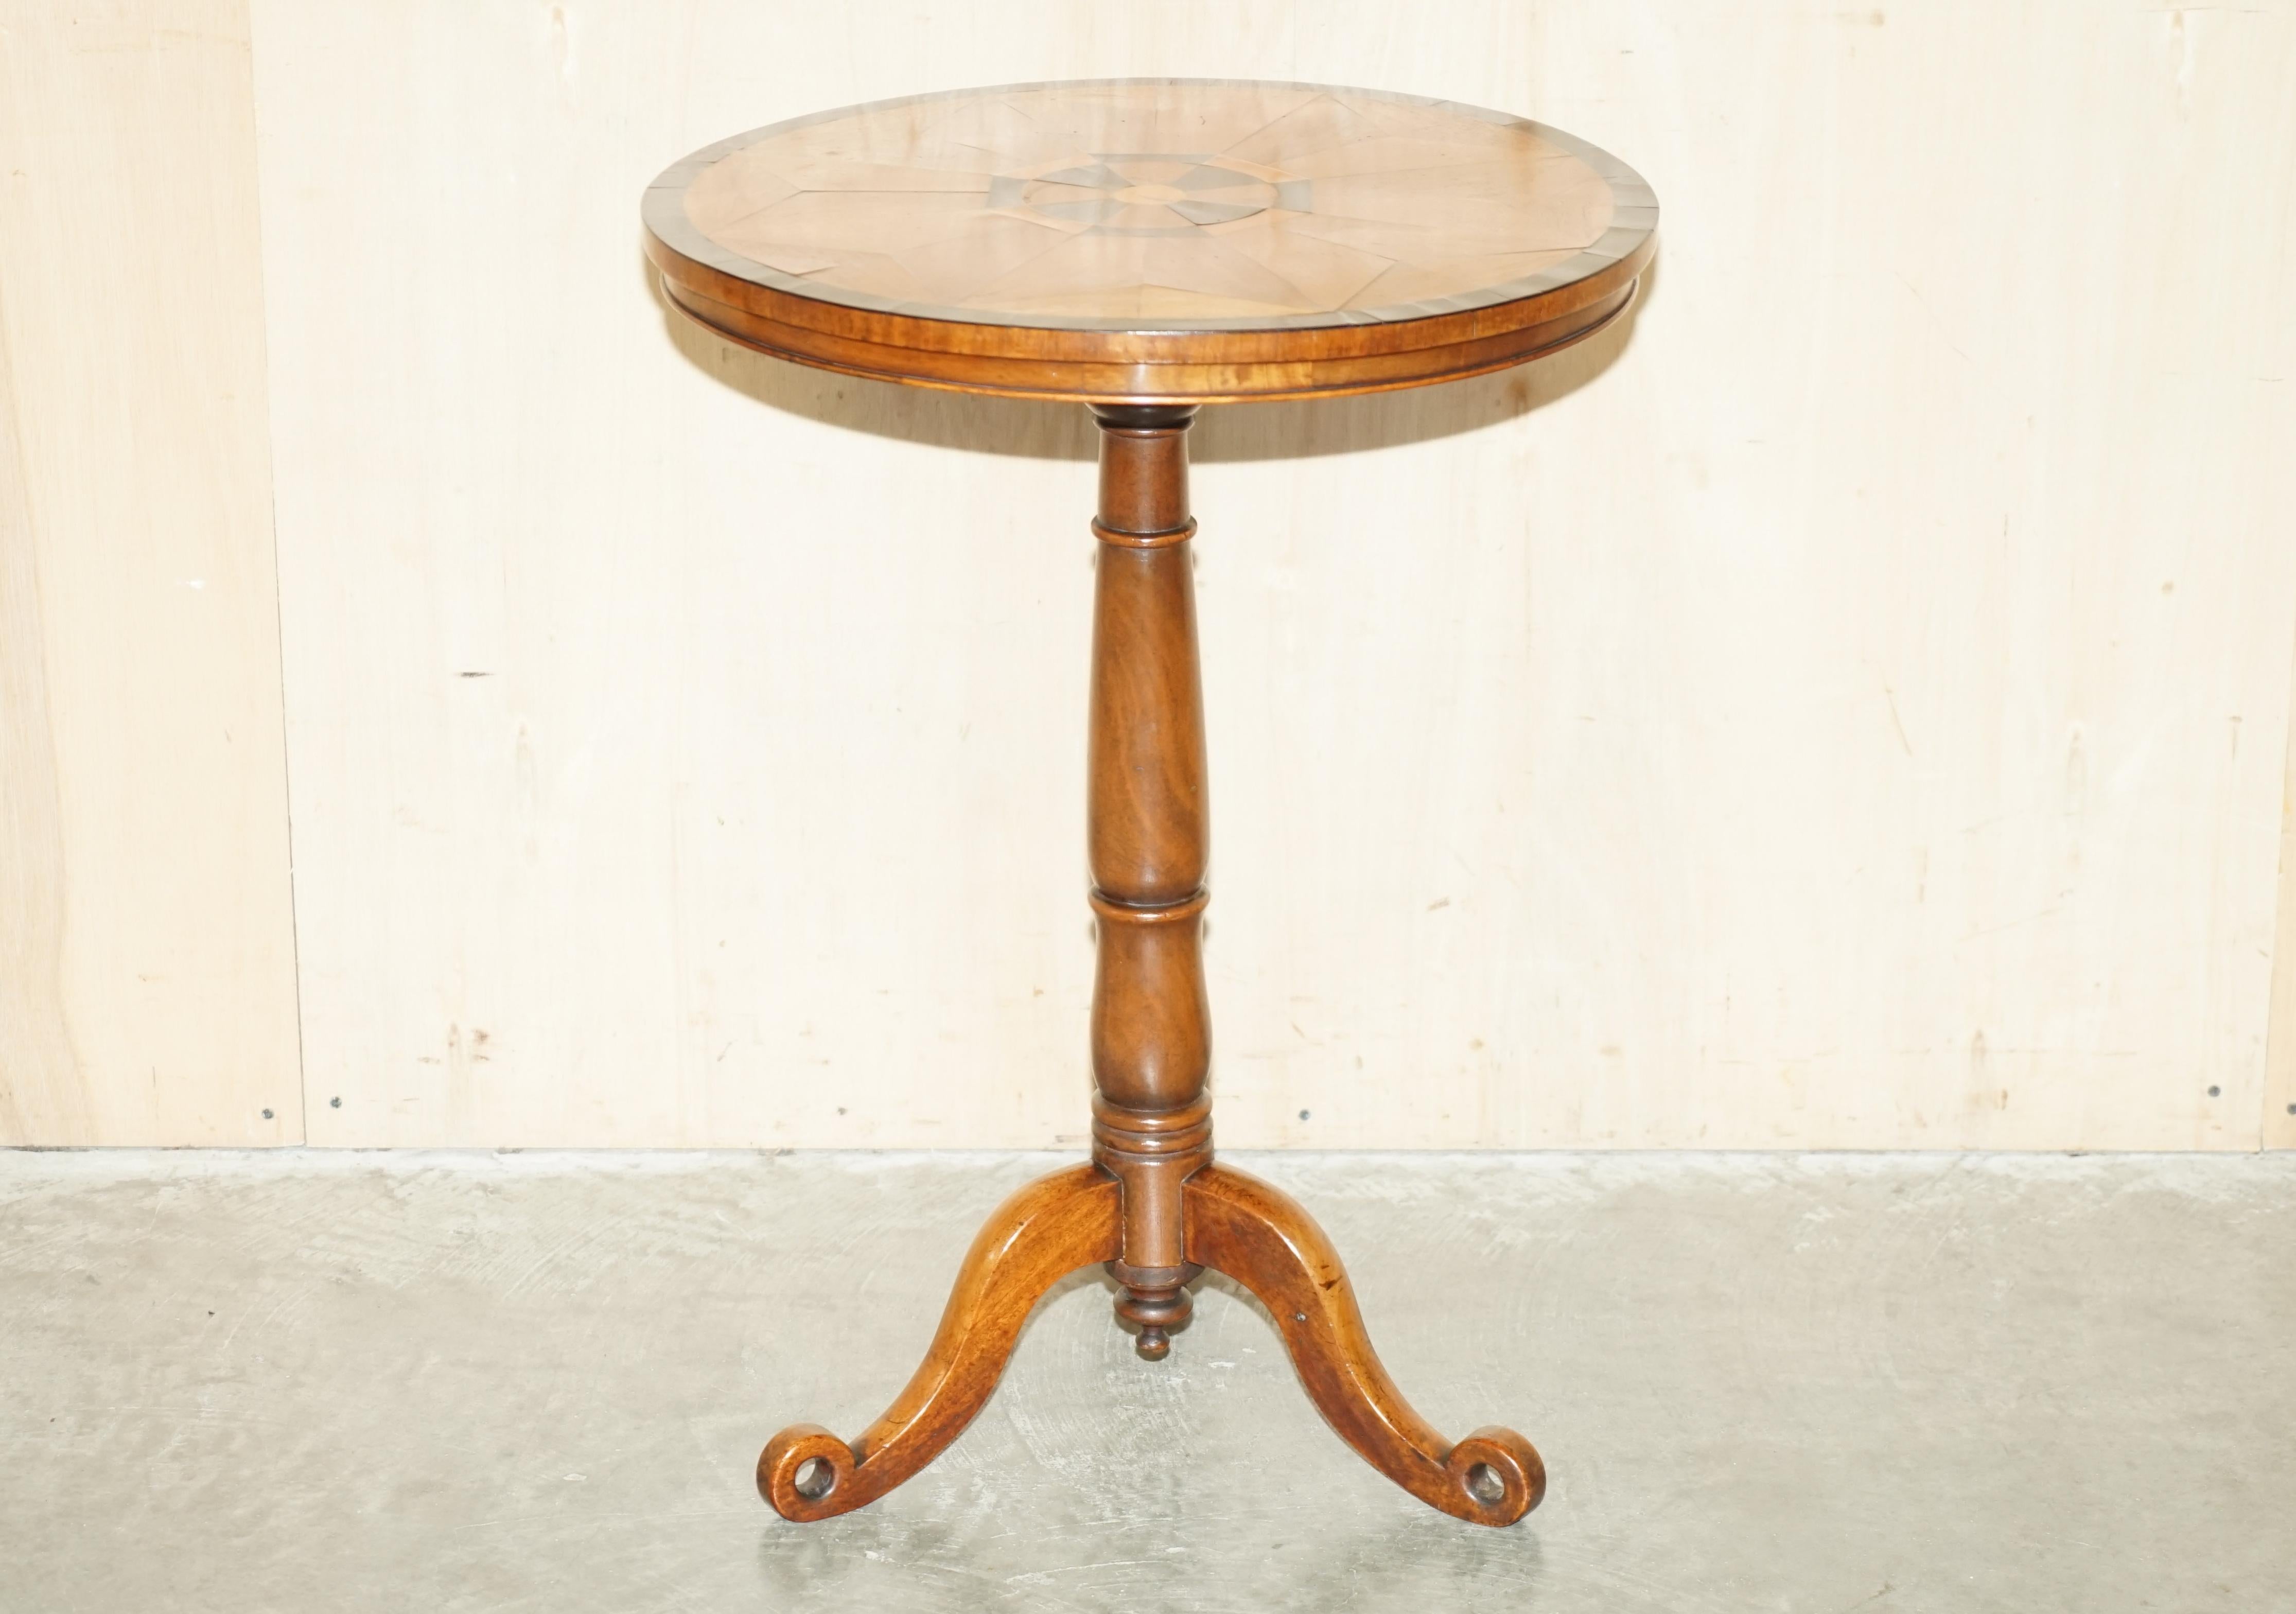 Royal House Antiques

Royal House Antiques is delighted to offer for sale this sublime Specimen occasional table with was made in 1840 and has been fully restored by my French Polisher 

Please note the delivery fee listed is just a guide, it covers